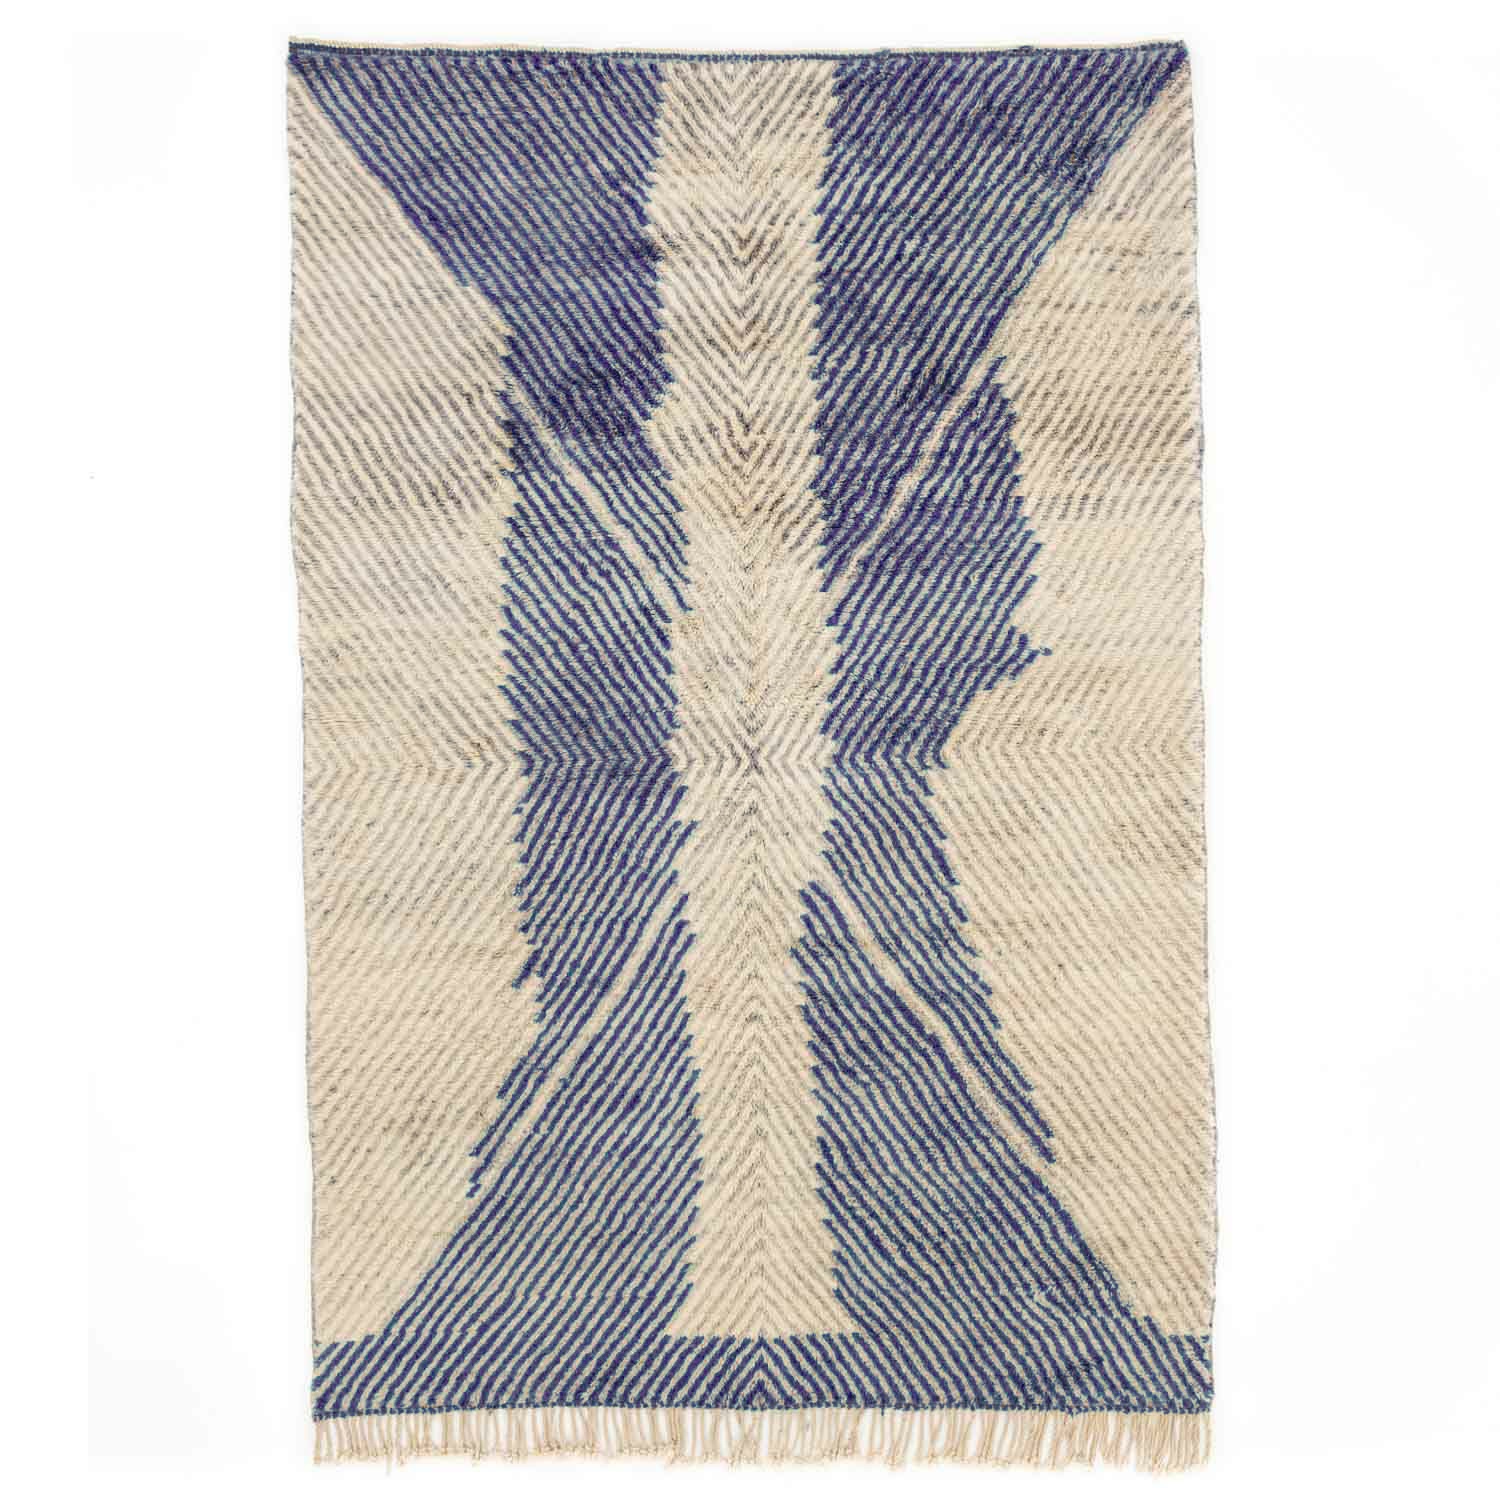 moroccan wool rug gray and blue stripes